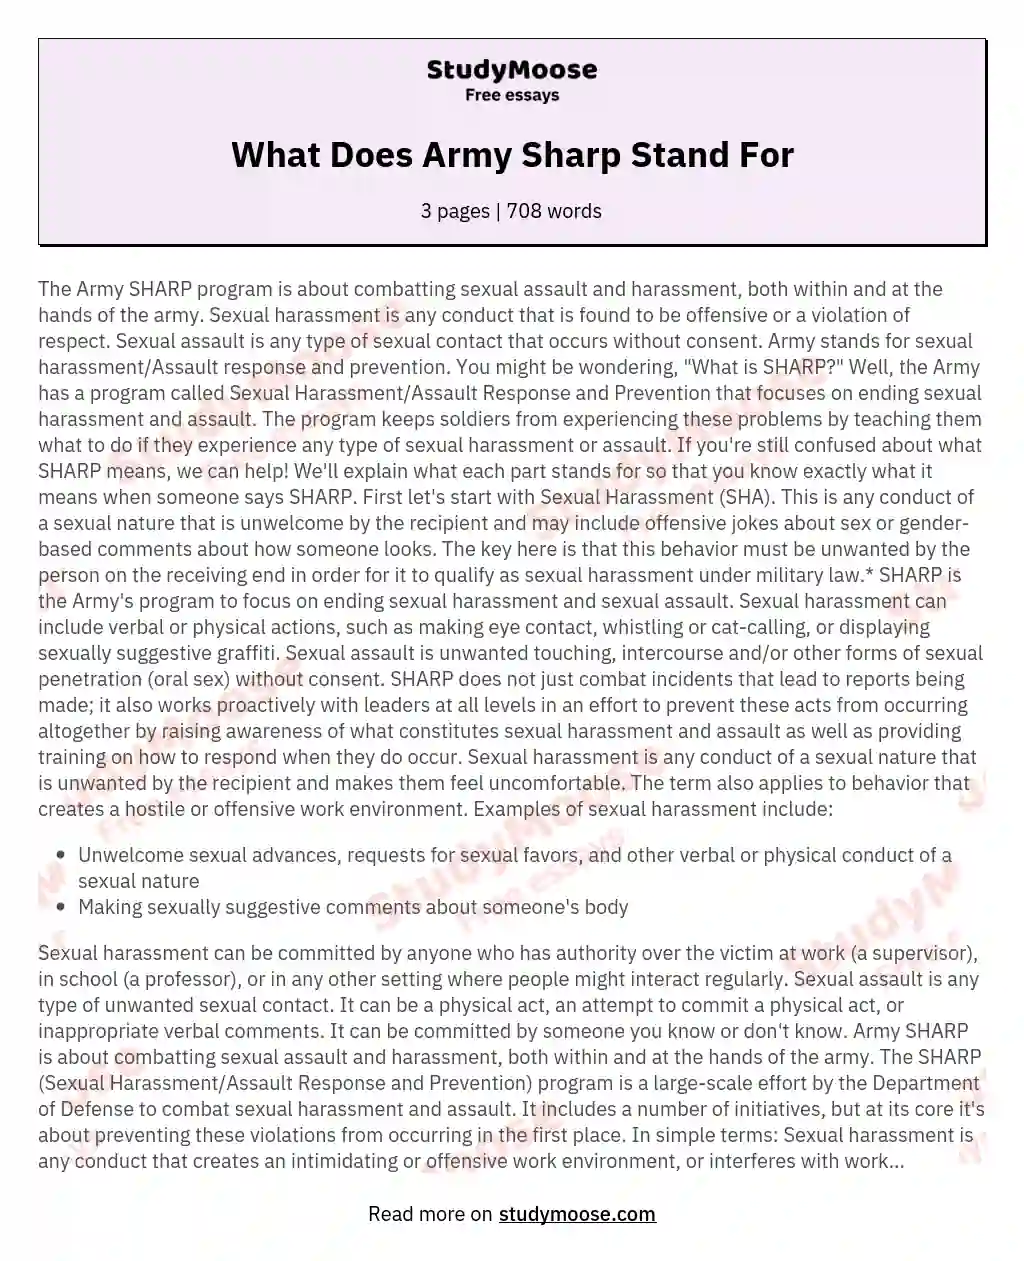 What Does Army Sharp Stand For essay